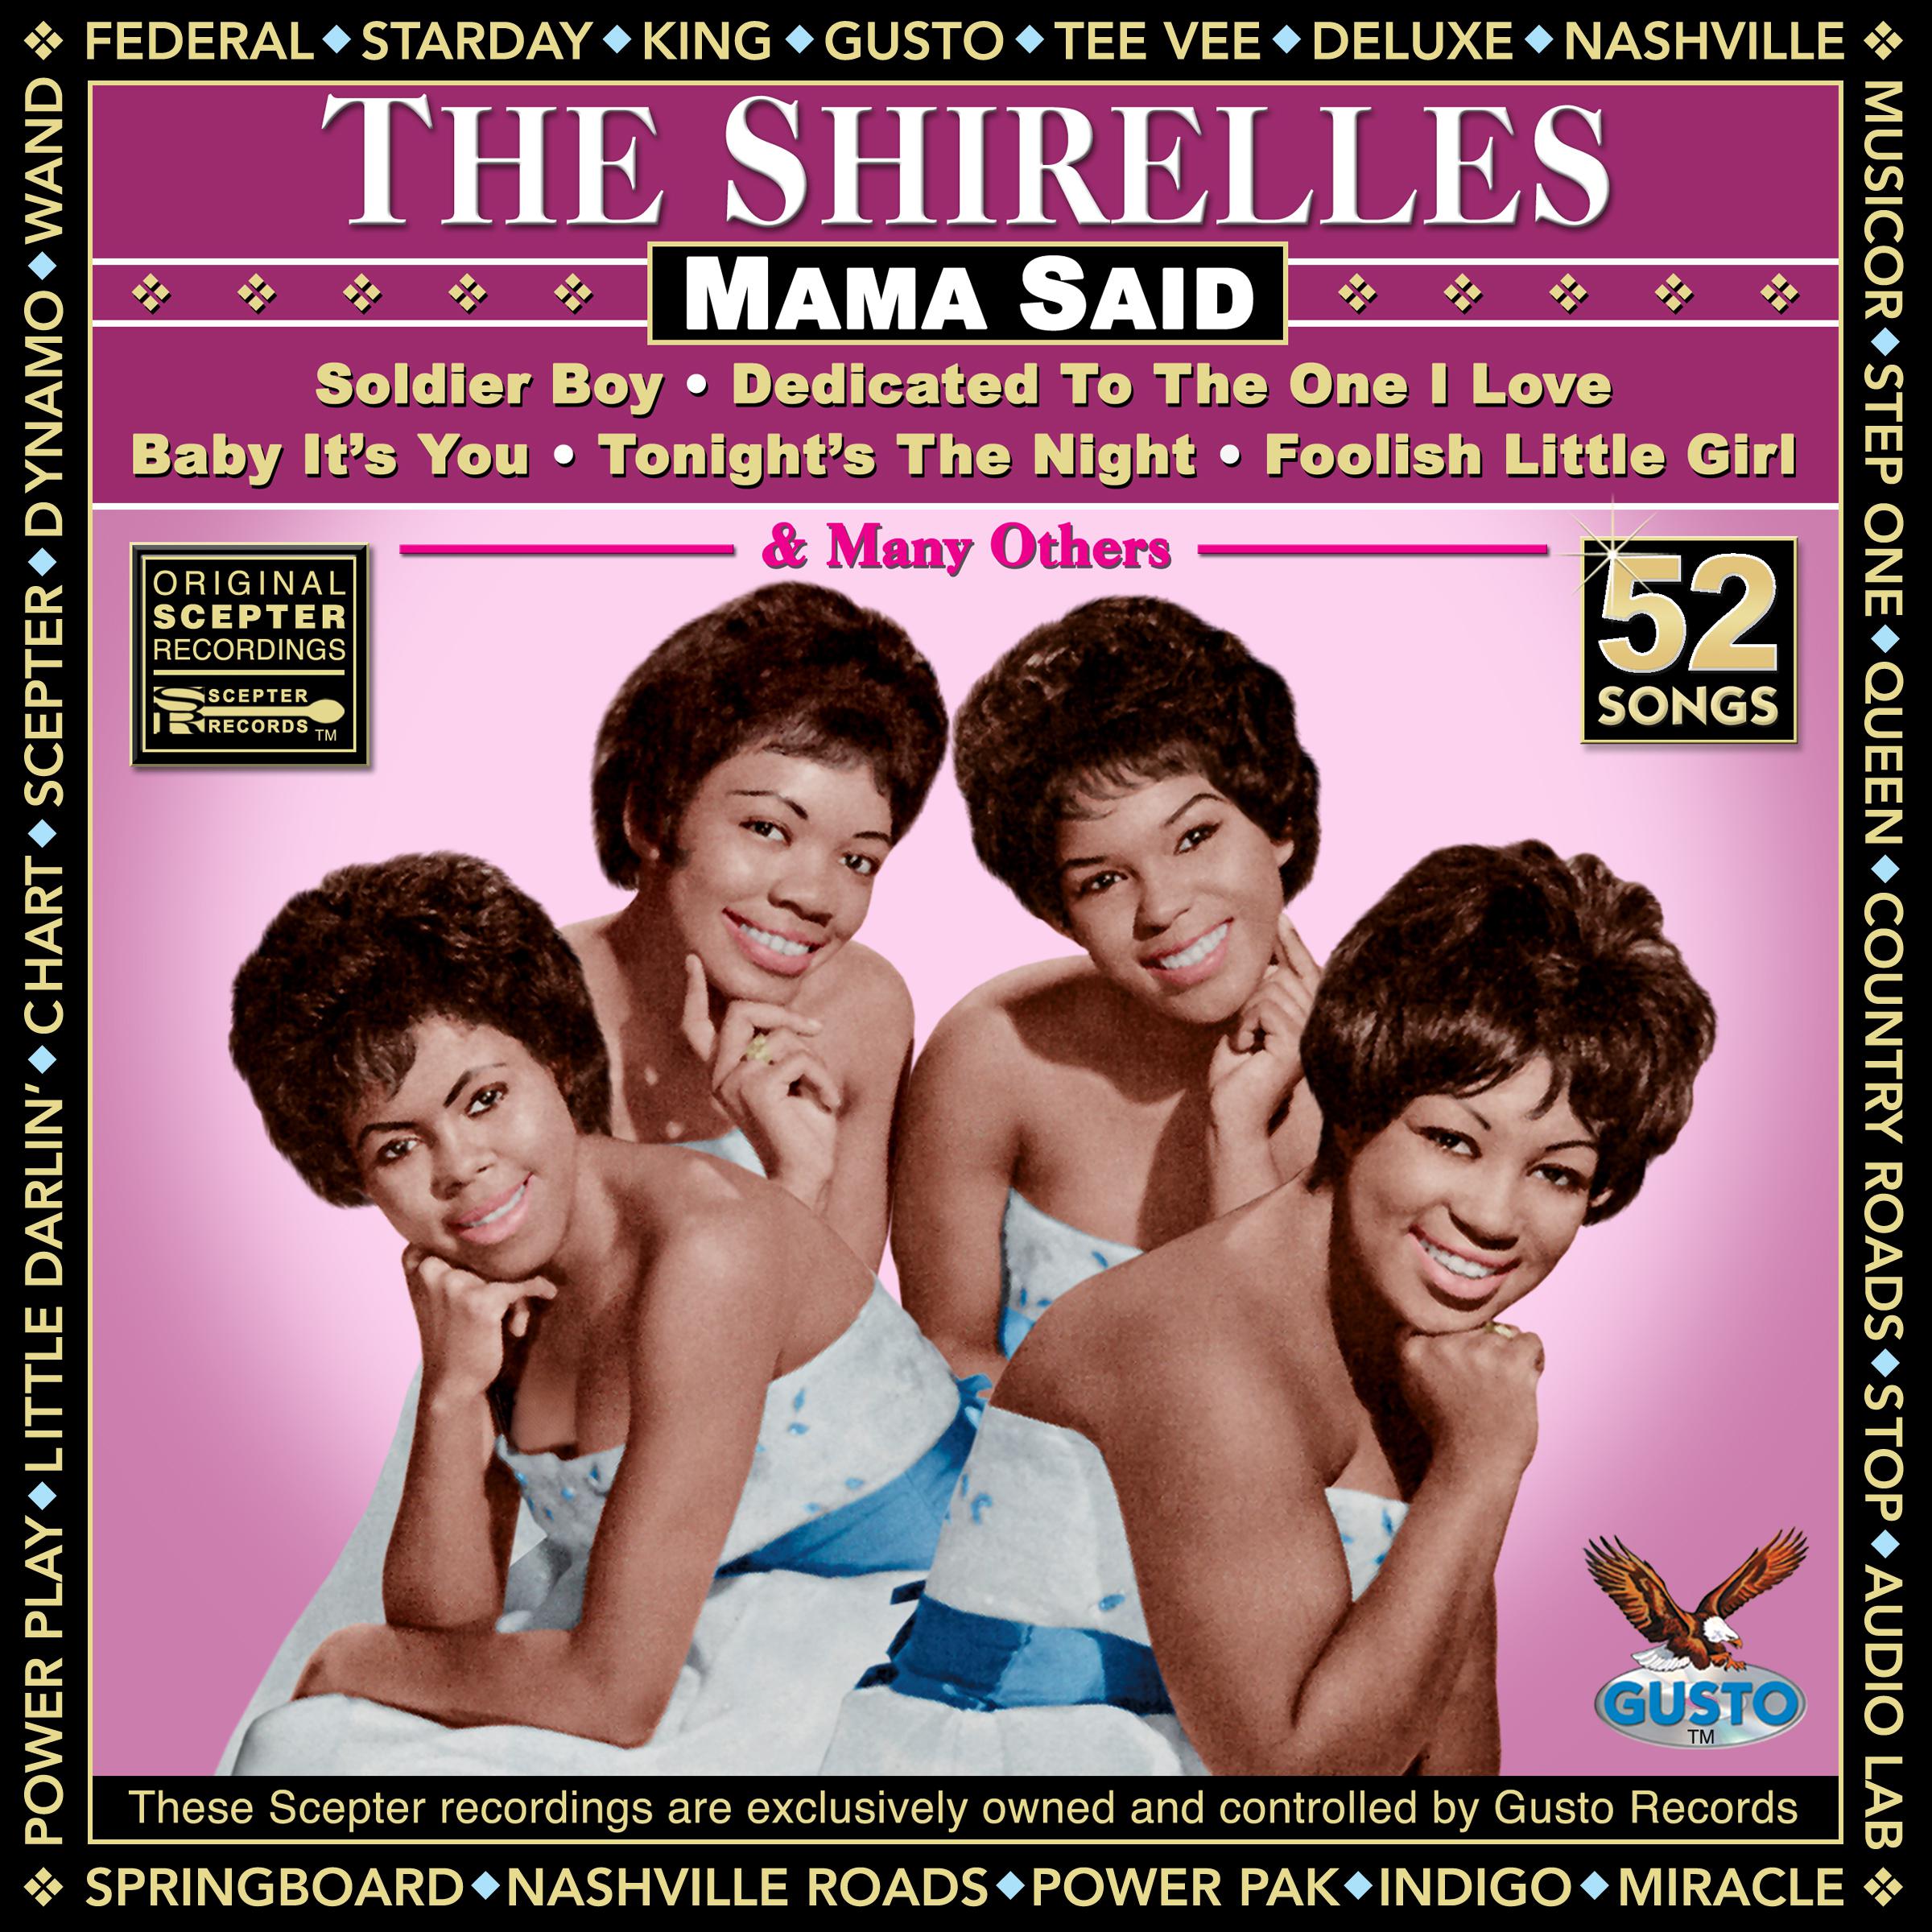 The Shirelles - It's A Mad, Mad, Mad, Mad World (Original Scepter Records Recording)